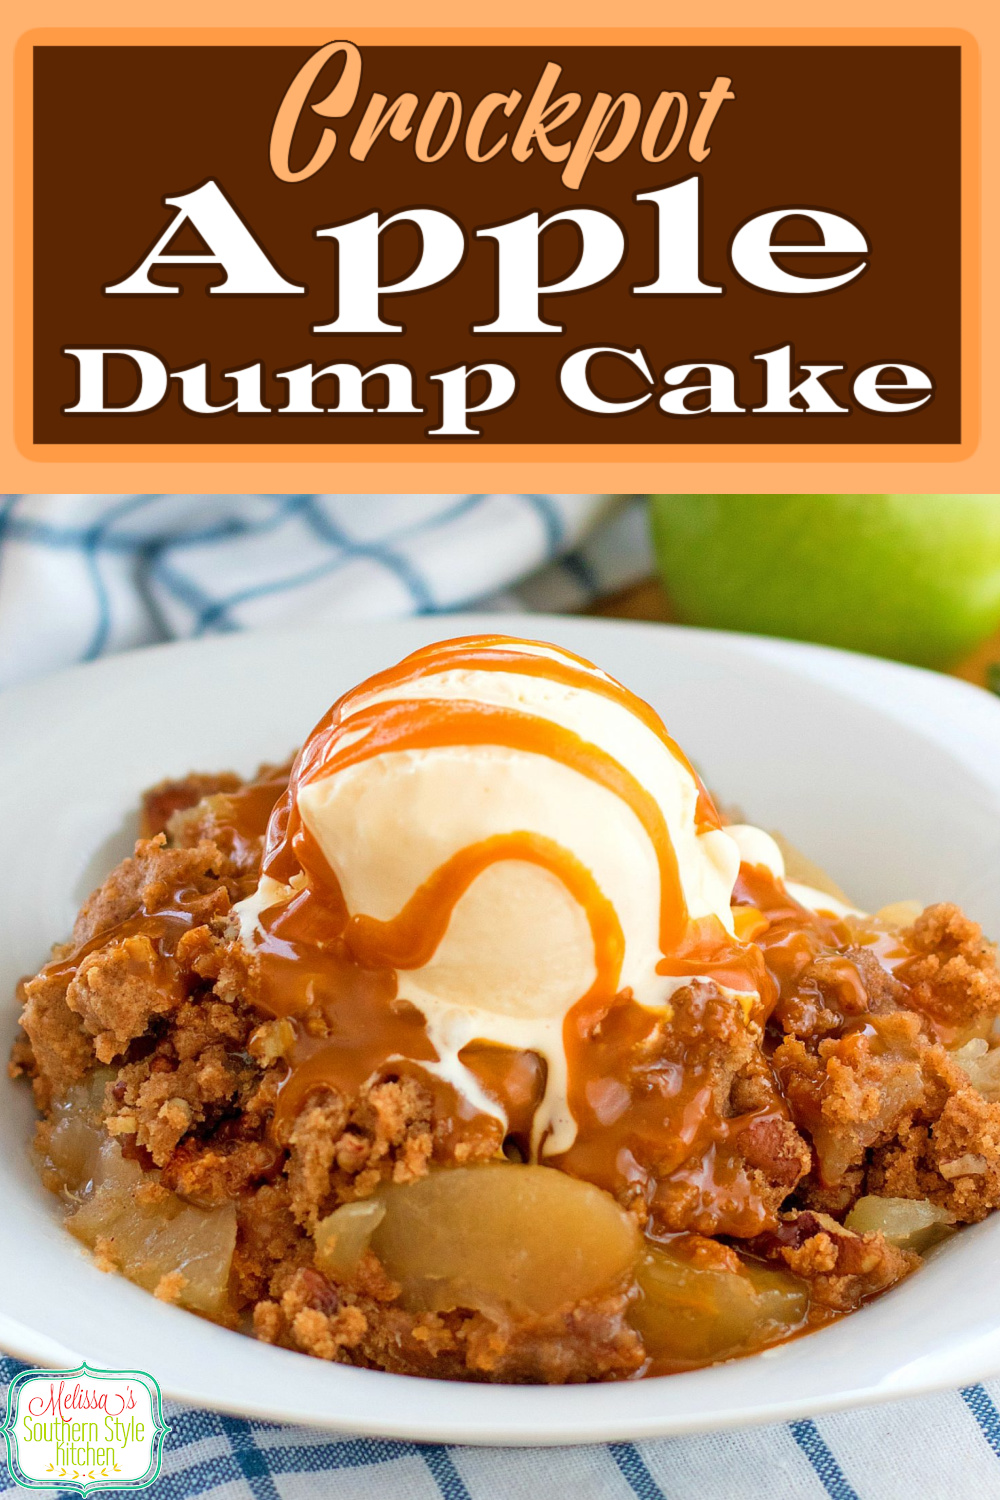 This easy Crockpot Apple Dump Cake takes minutes to assemble. Serve it with a generous scoop of vanilla ice cream and a drizzle of butterscotch ganache for the finish #crockpotappledumpcake #appledumpcake #apples #fallbaking #thanksgivingrecipes #slowcookercakes #cakerecipes #applecake #butterscotchsauce #cakes #dumpcakes #southernrecipes #southernfood via @melissasssk